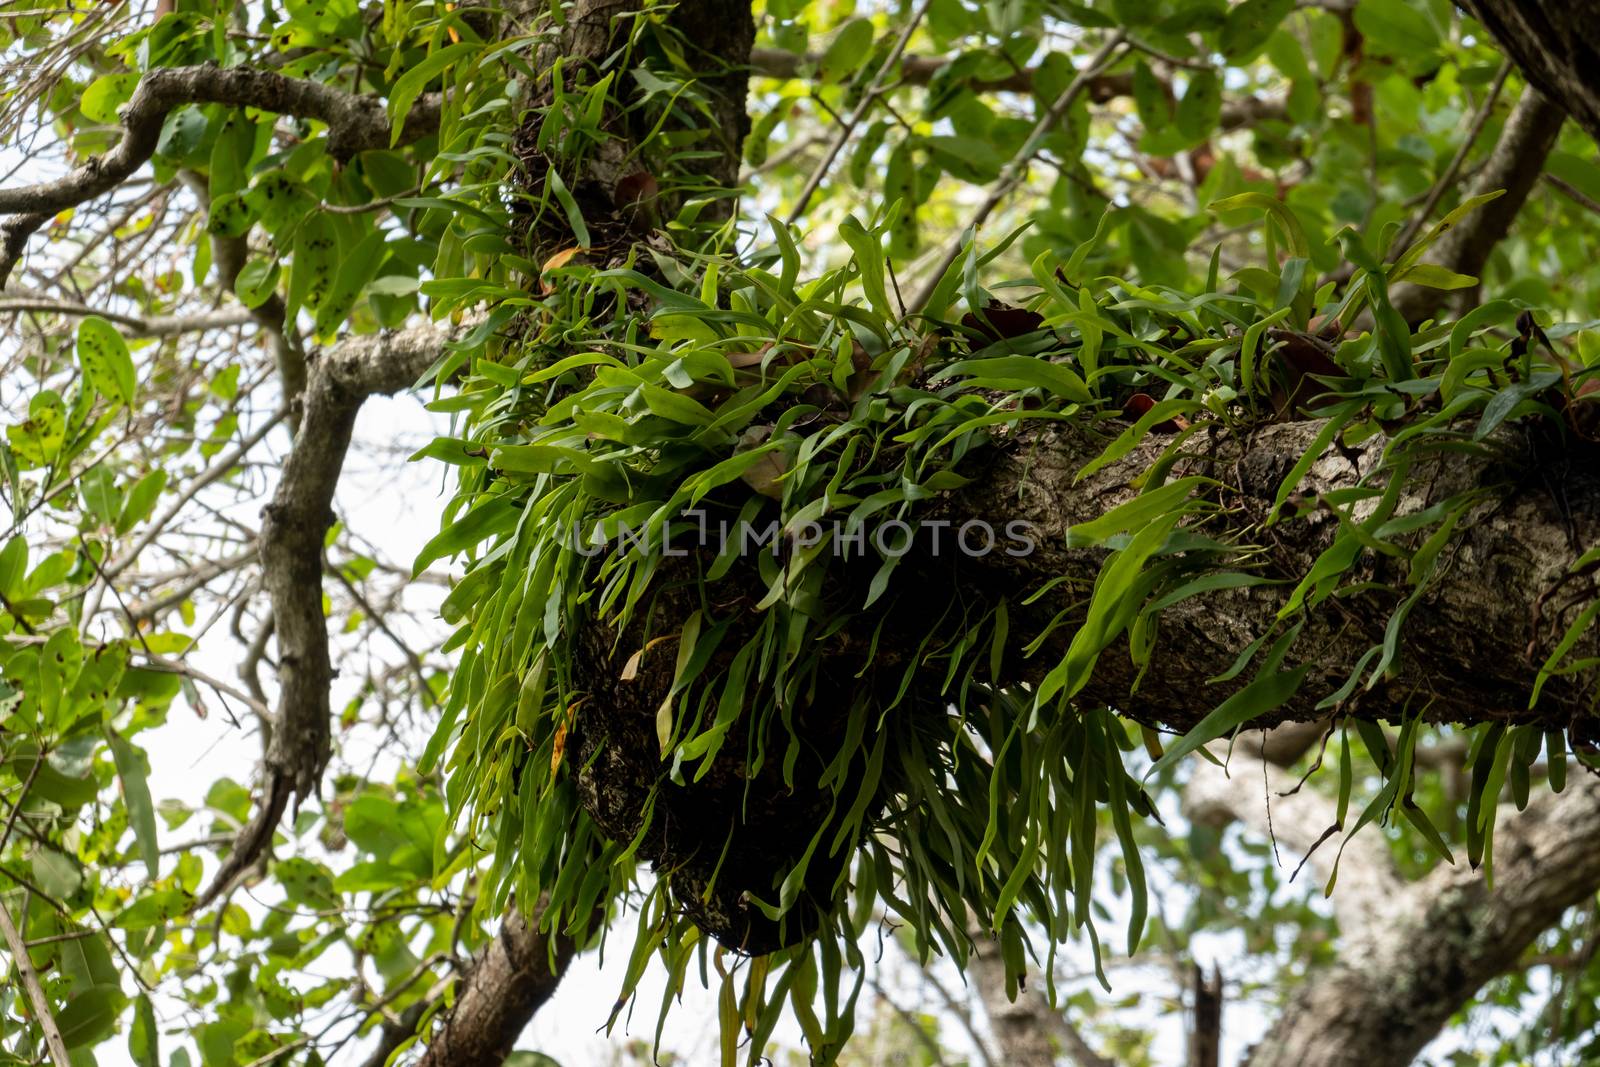 A parasitic plant growing on tree branches.